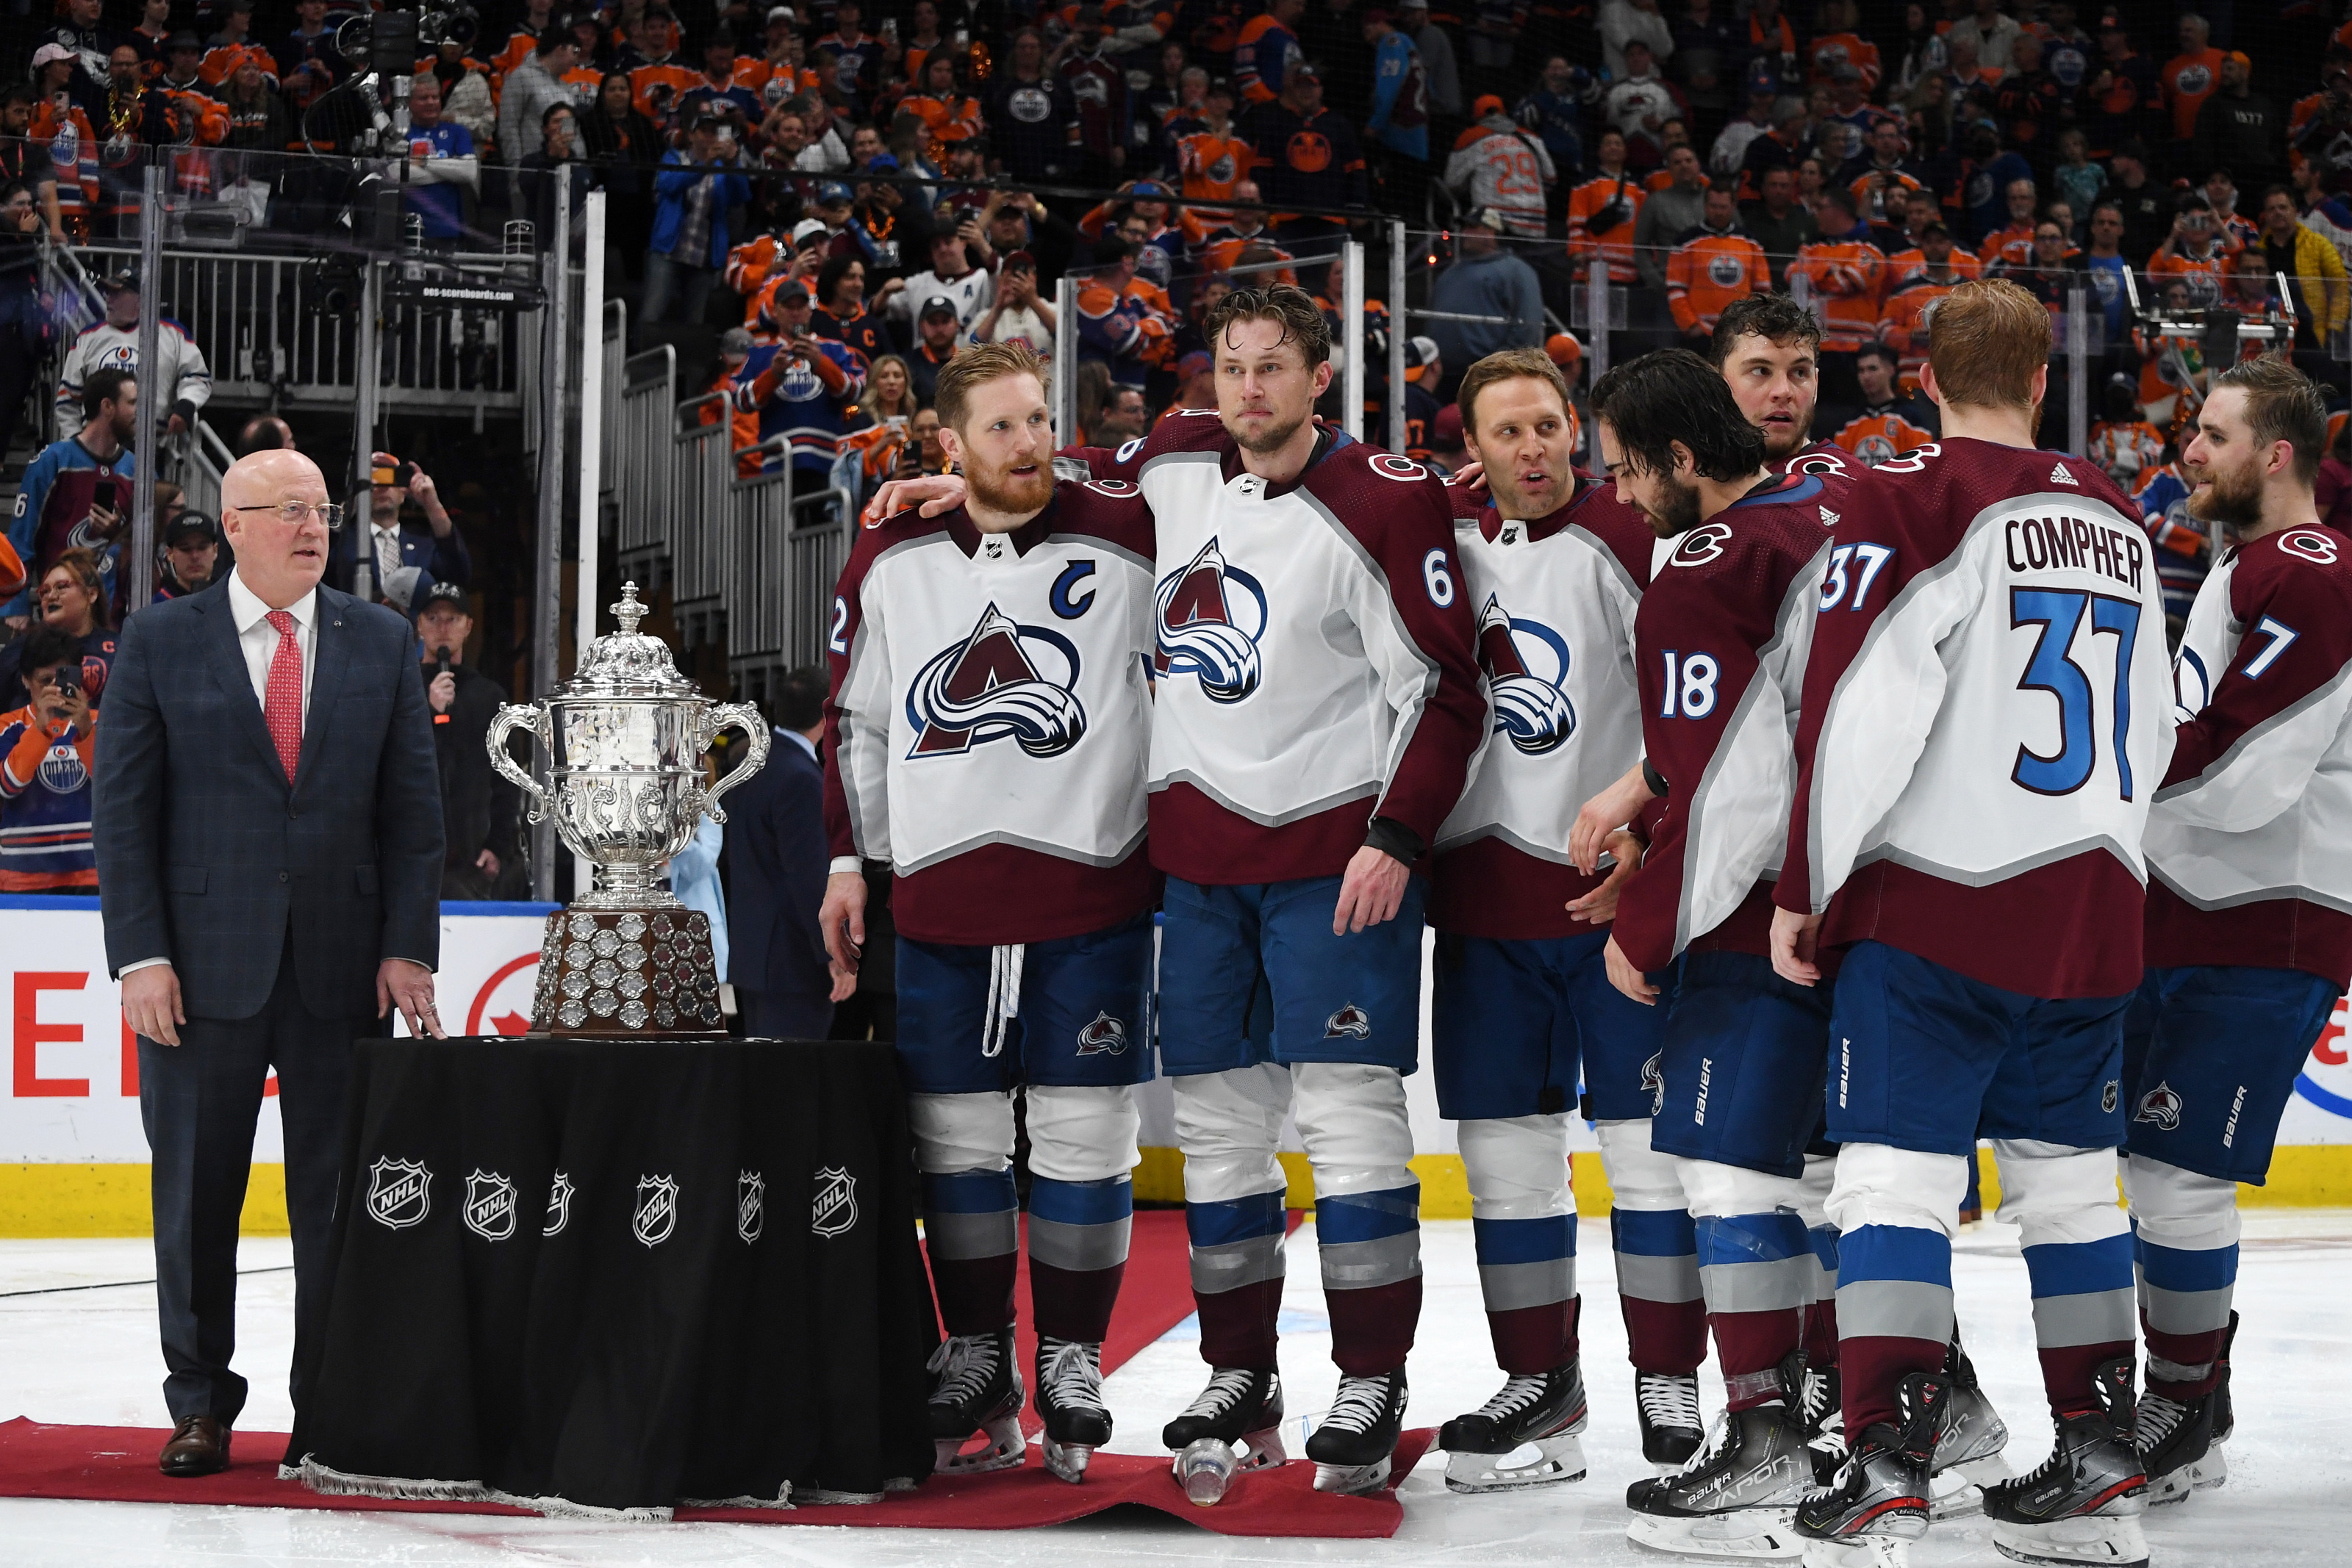 Colorado Avalanche - Franchise, Team, Arena and Uniform History